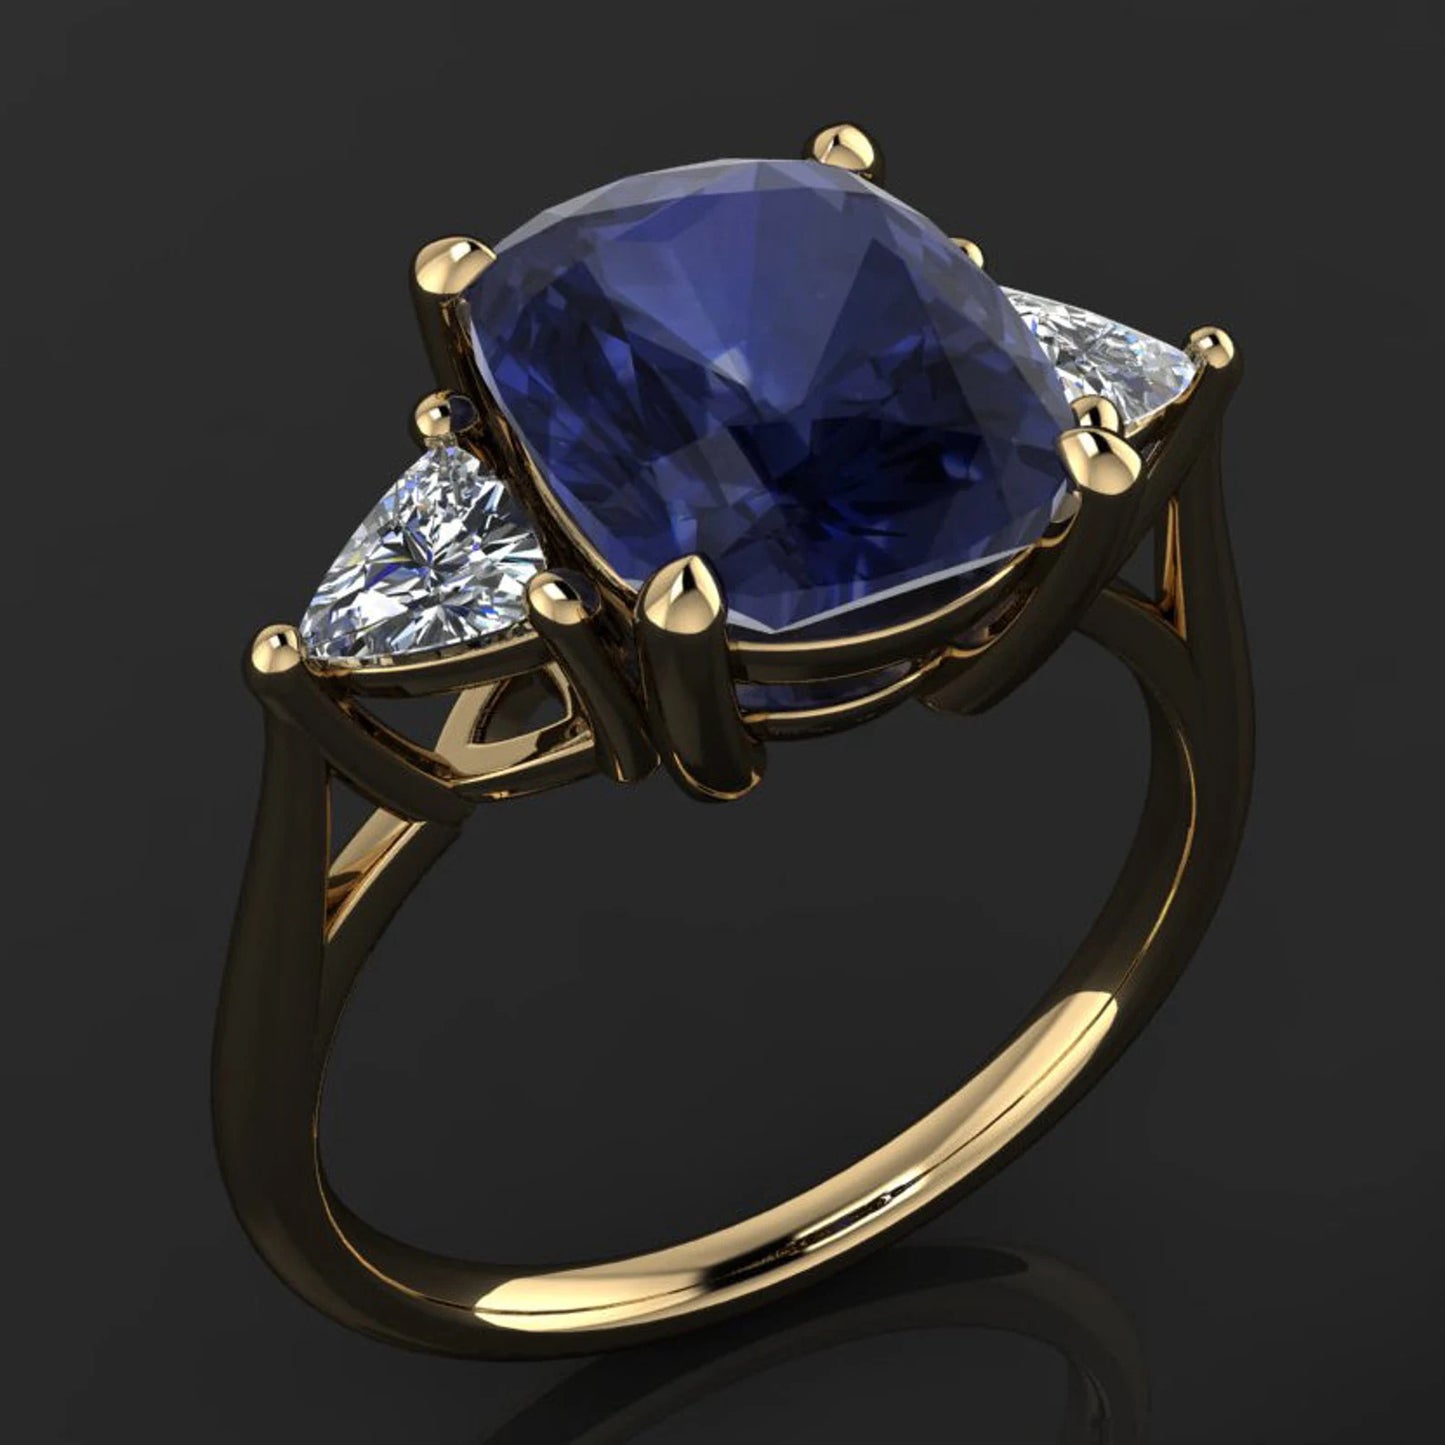 amelie ring - cushion cut lab grown sapphire engagement ring - J Hollywood Designs